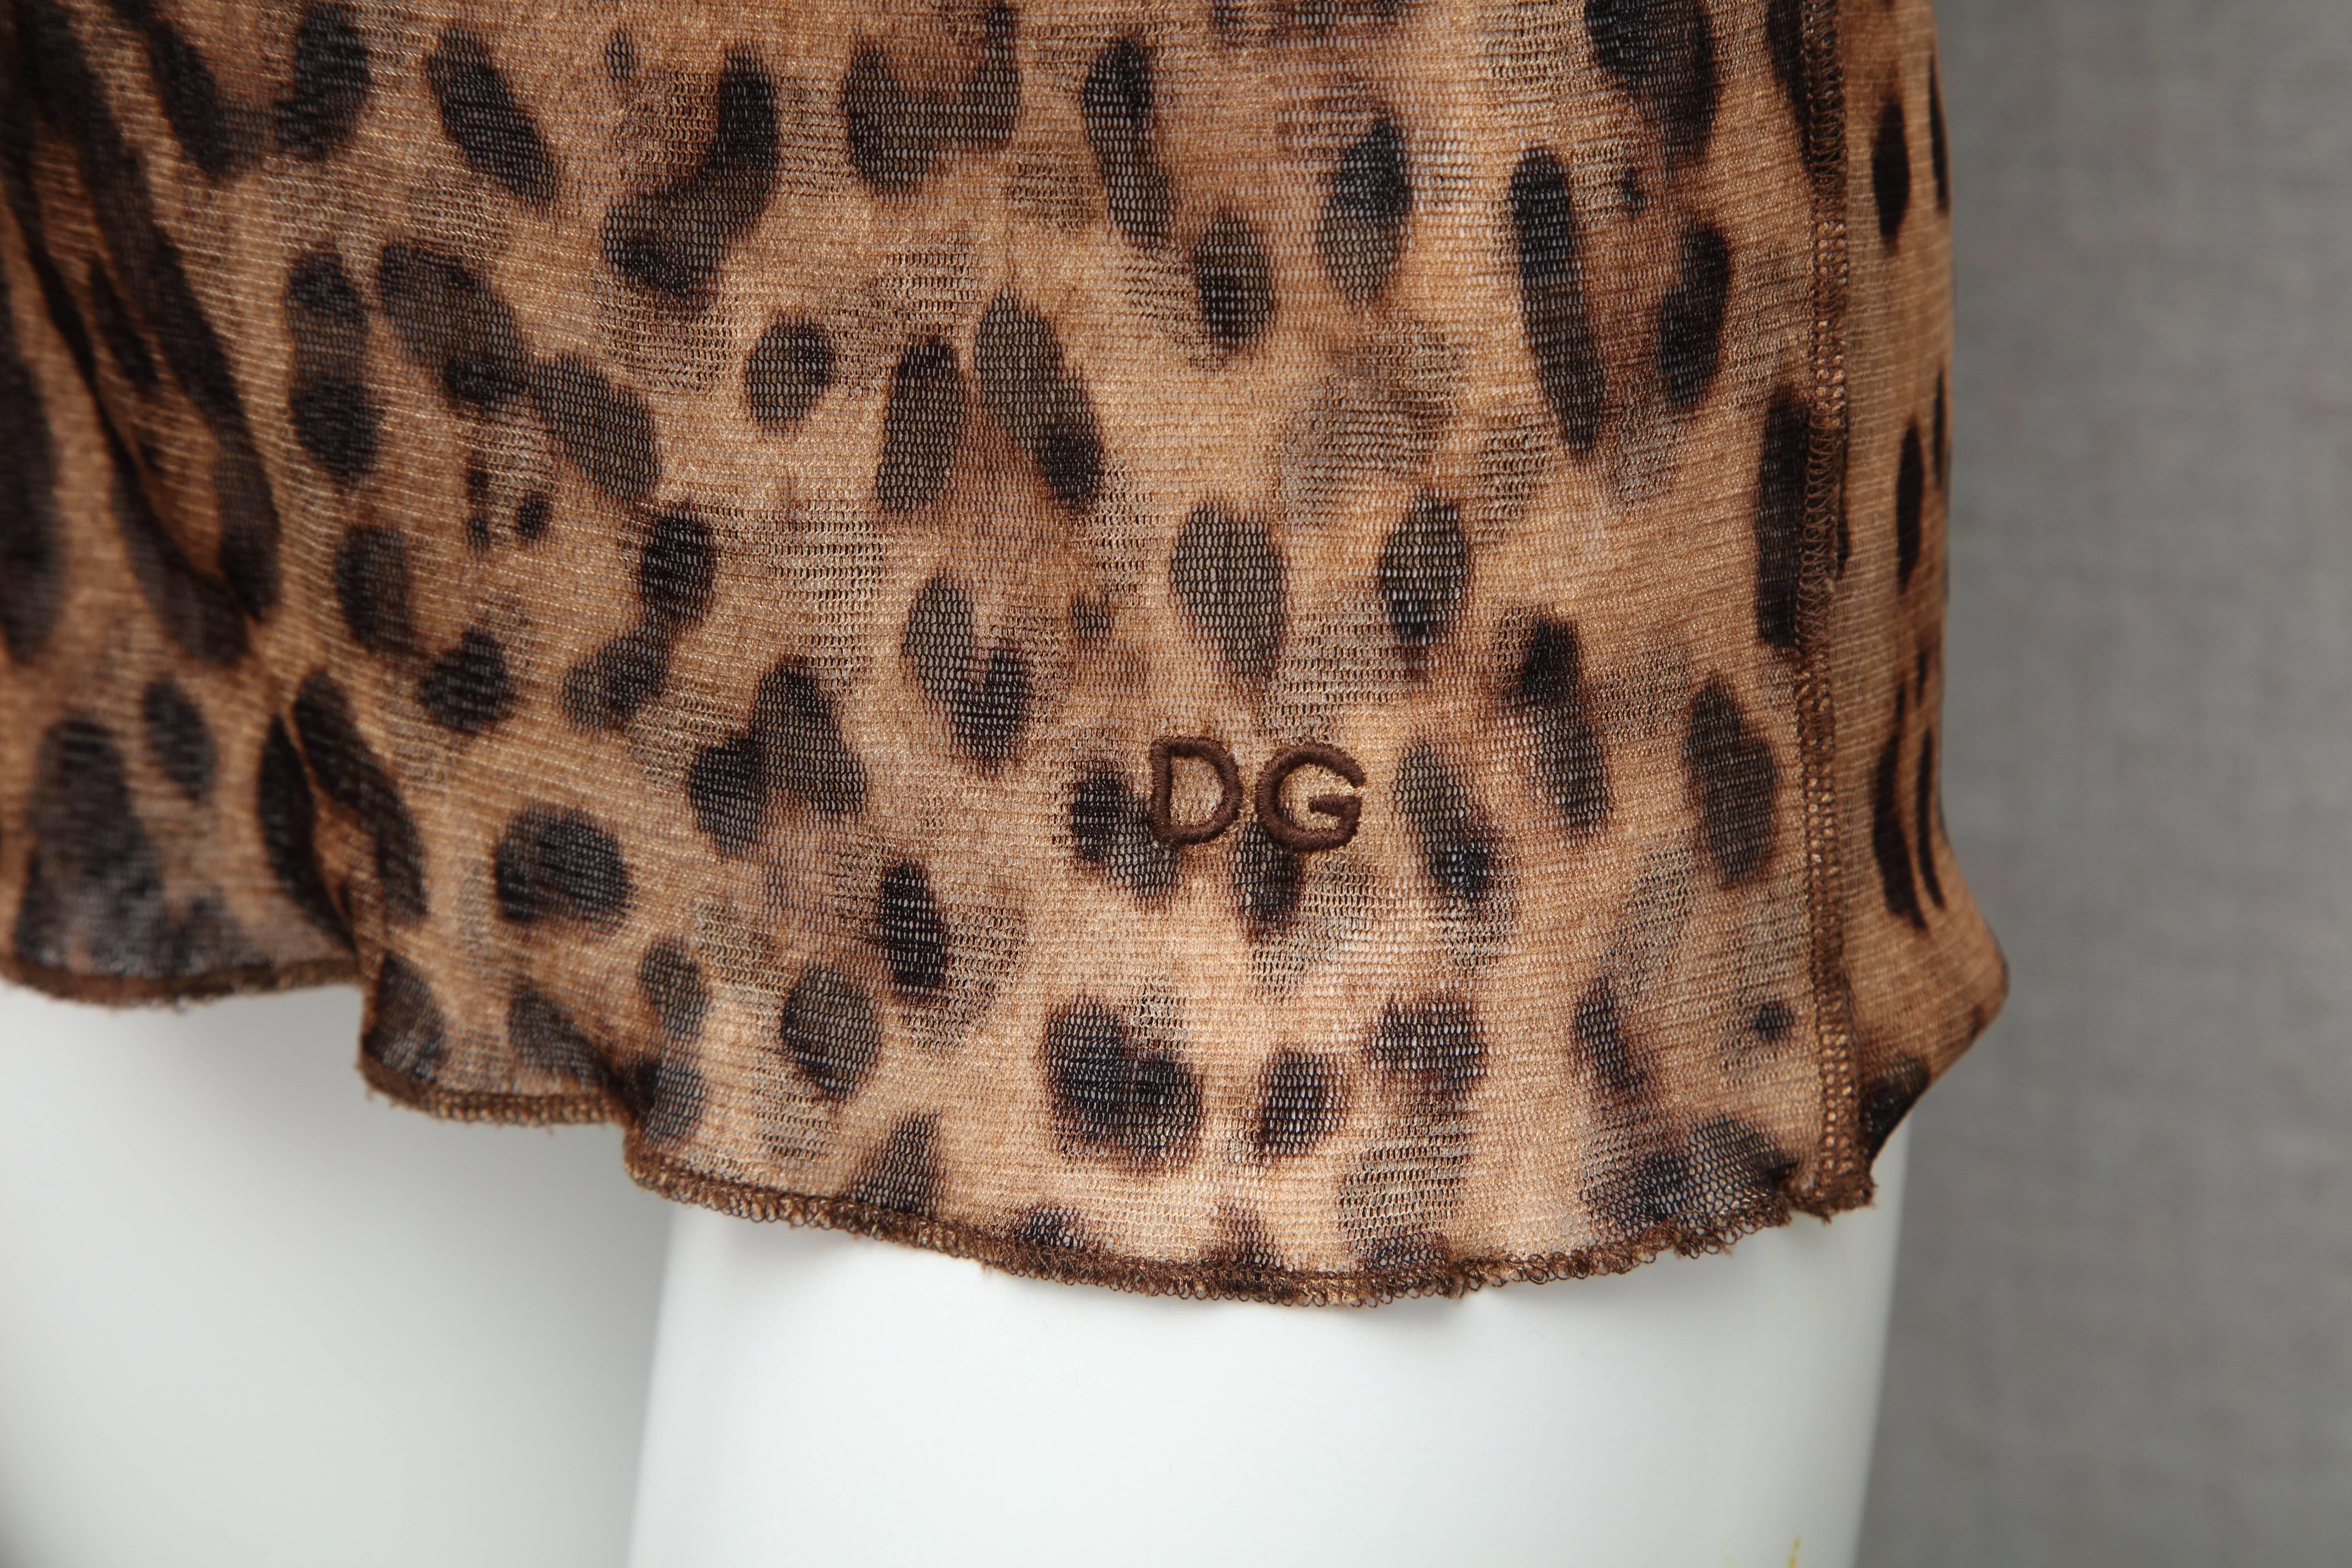 Dolce & Gabbana Leopard Print Top

Fits Size: 0-4

100% silk and see-through